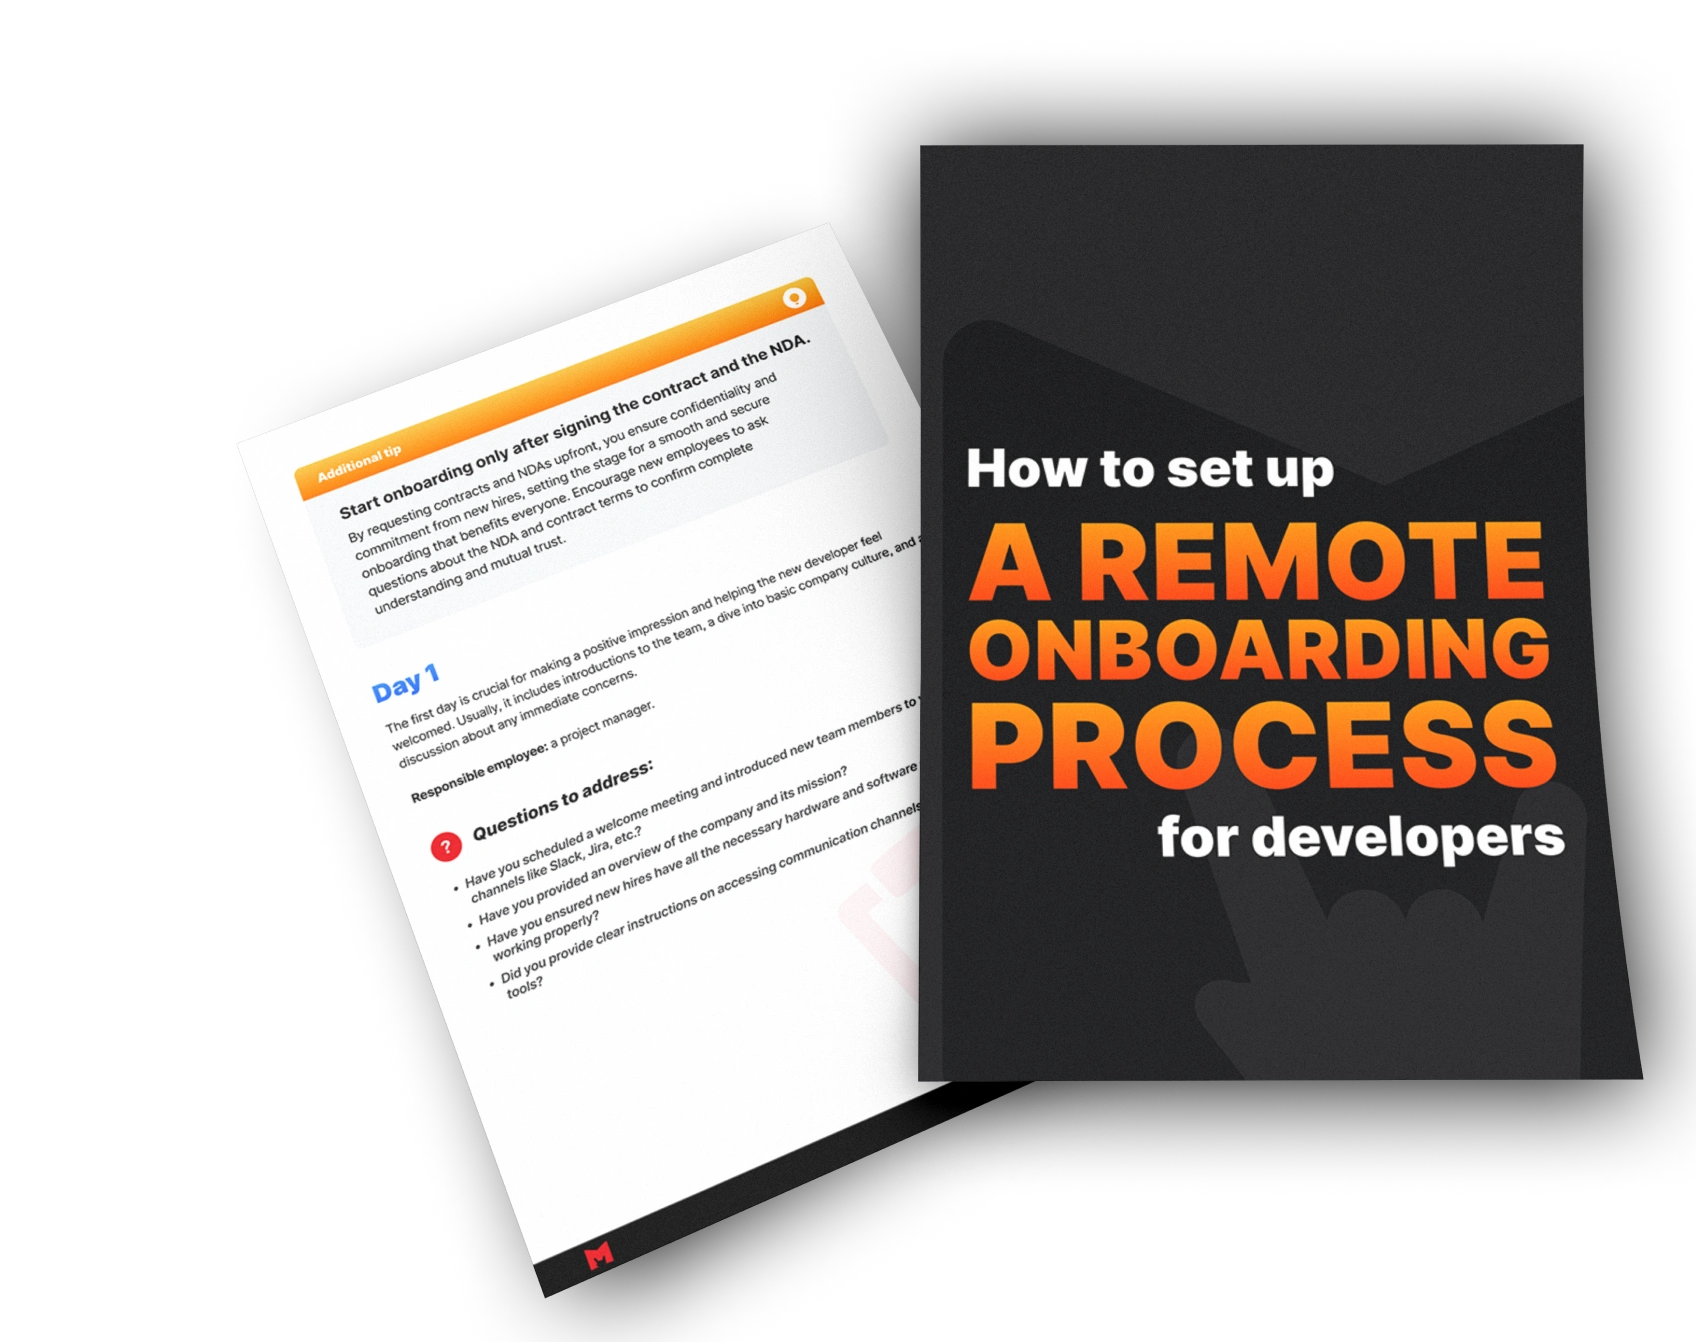 How to set up a remote onboarding process for developers